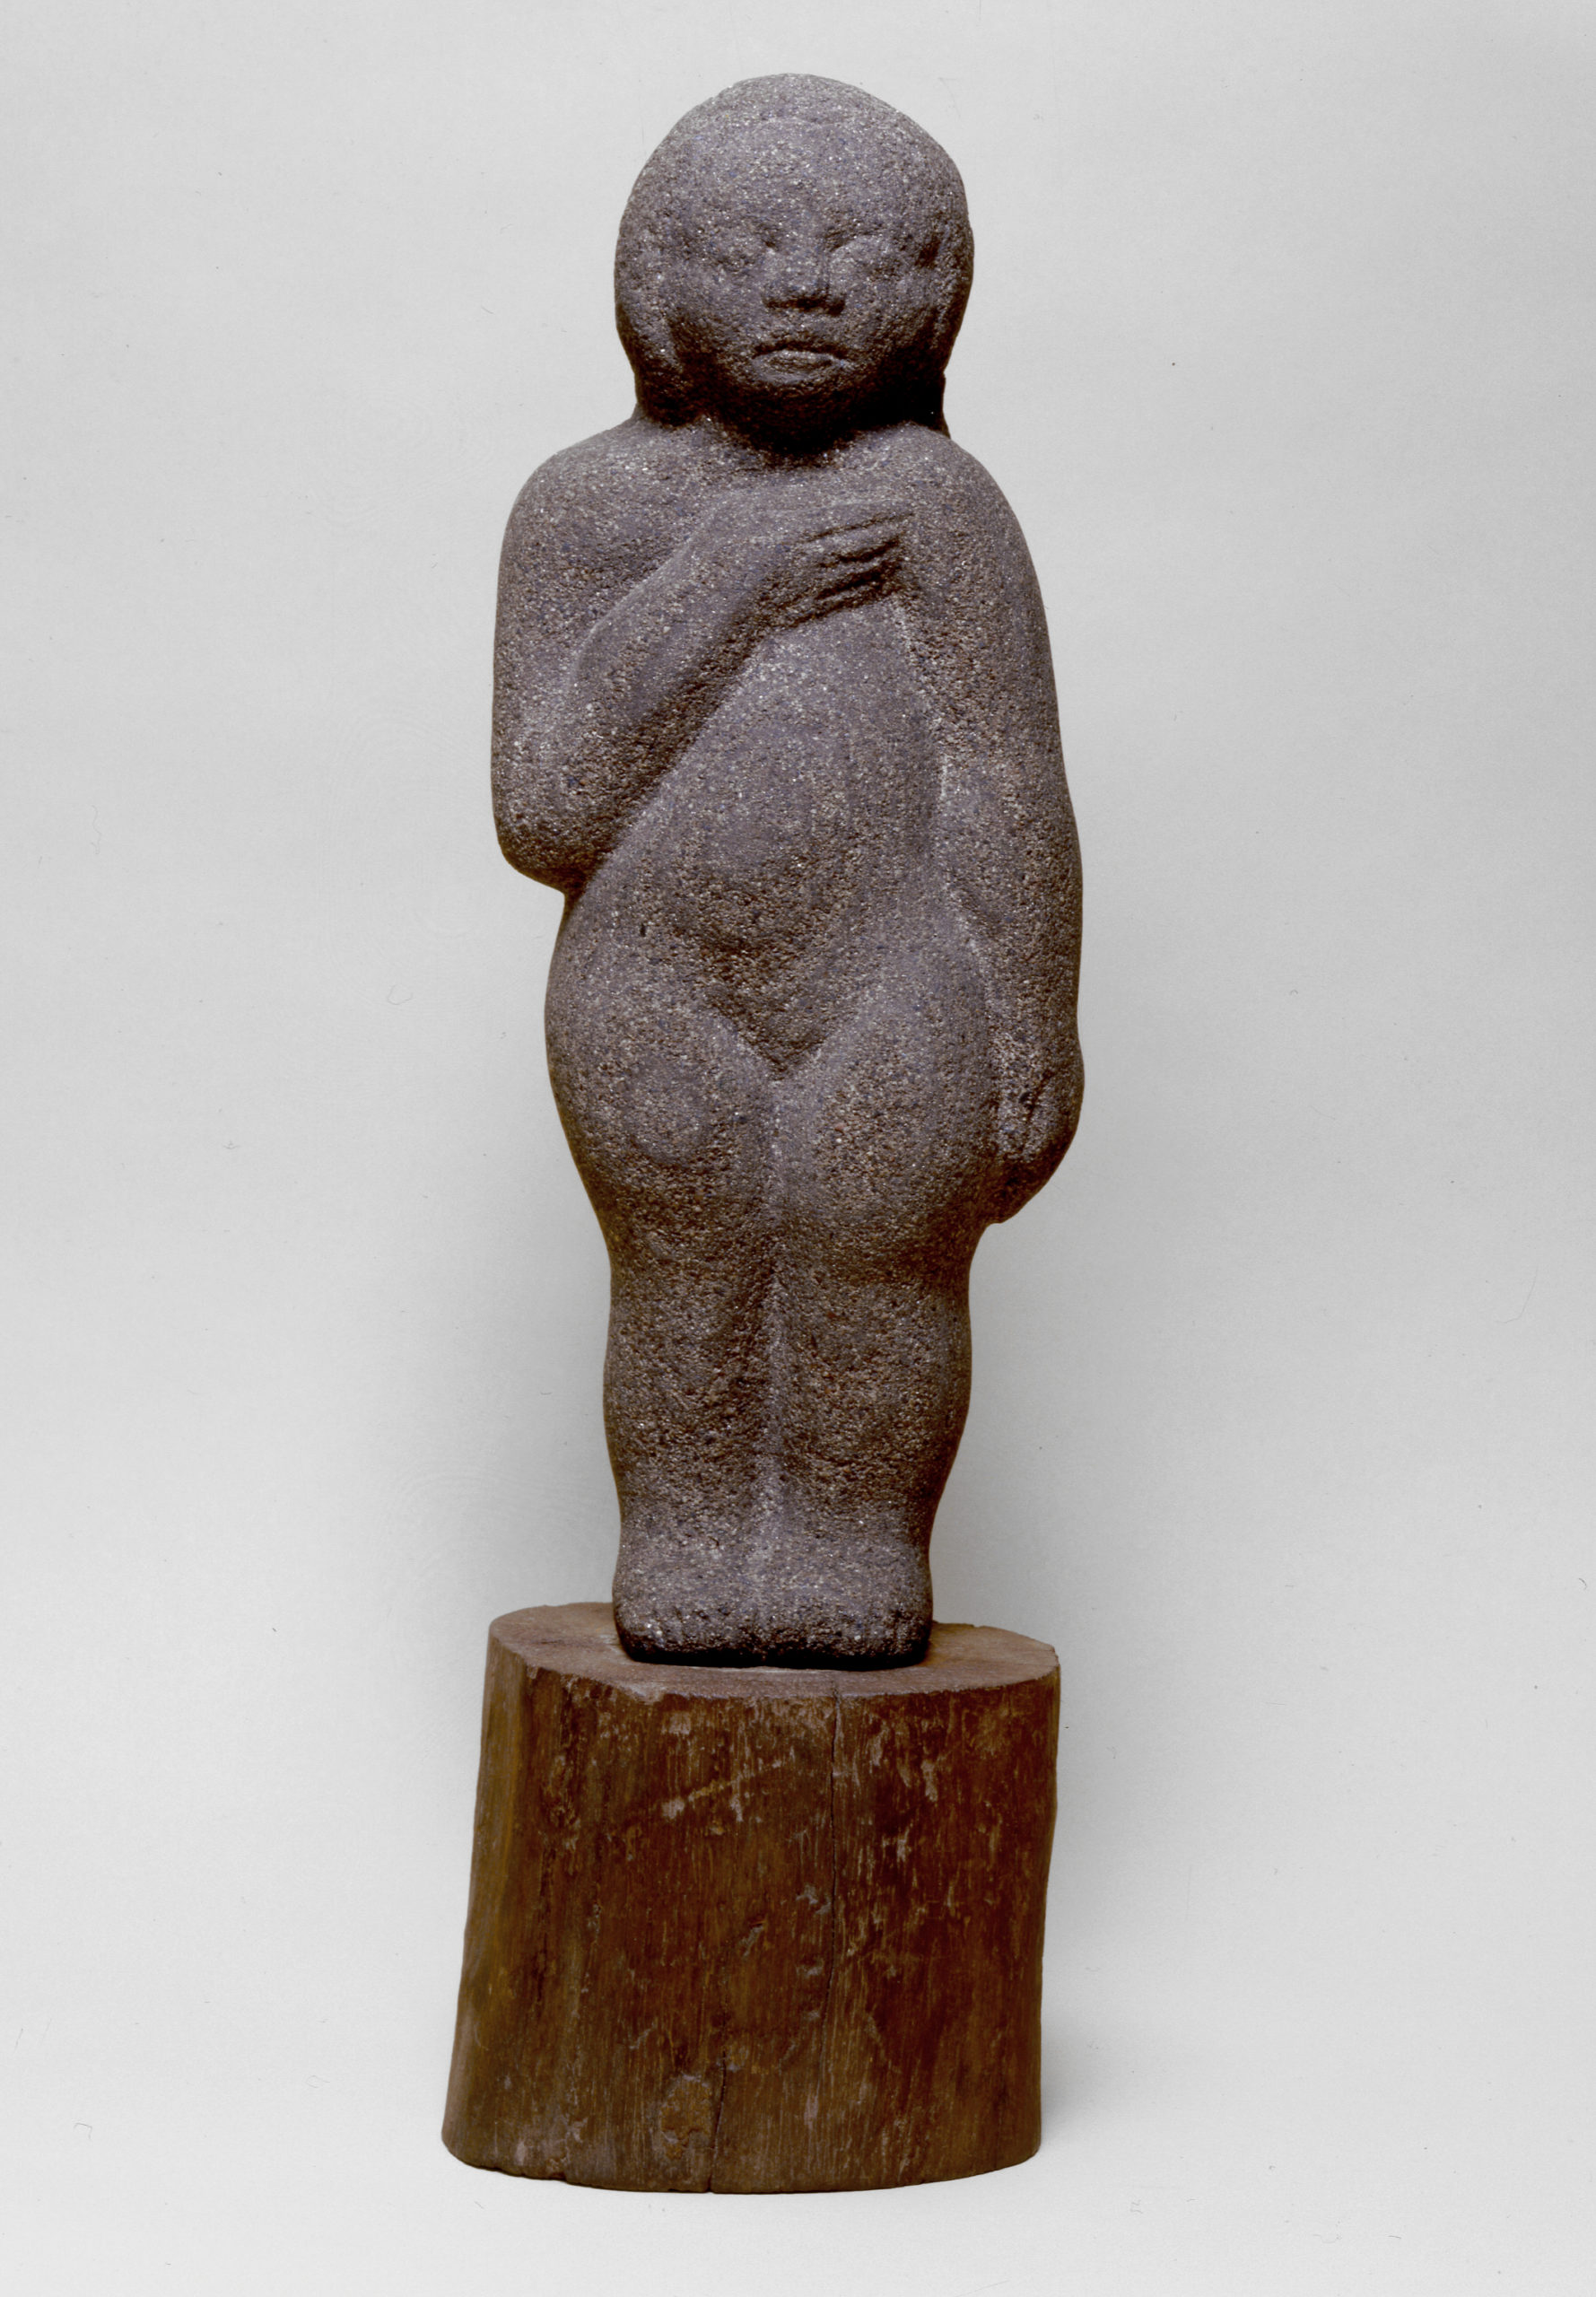 

											American Figurative  </b>

											<em>
												Now on view in New York</em> 

											<h4>
																							</h4>

		                																																													<i>John Flannagan,</i>  
																																								Standing Child ca. 1928, 
																																								Brownstone on wood base, 
																																								21 inches including base 
																								
		                				